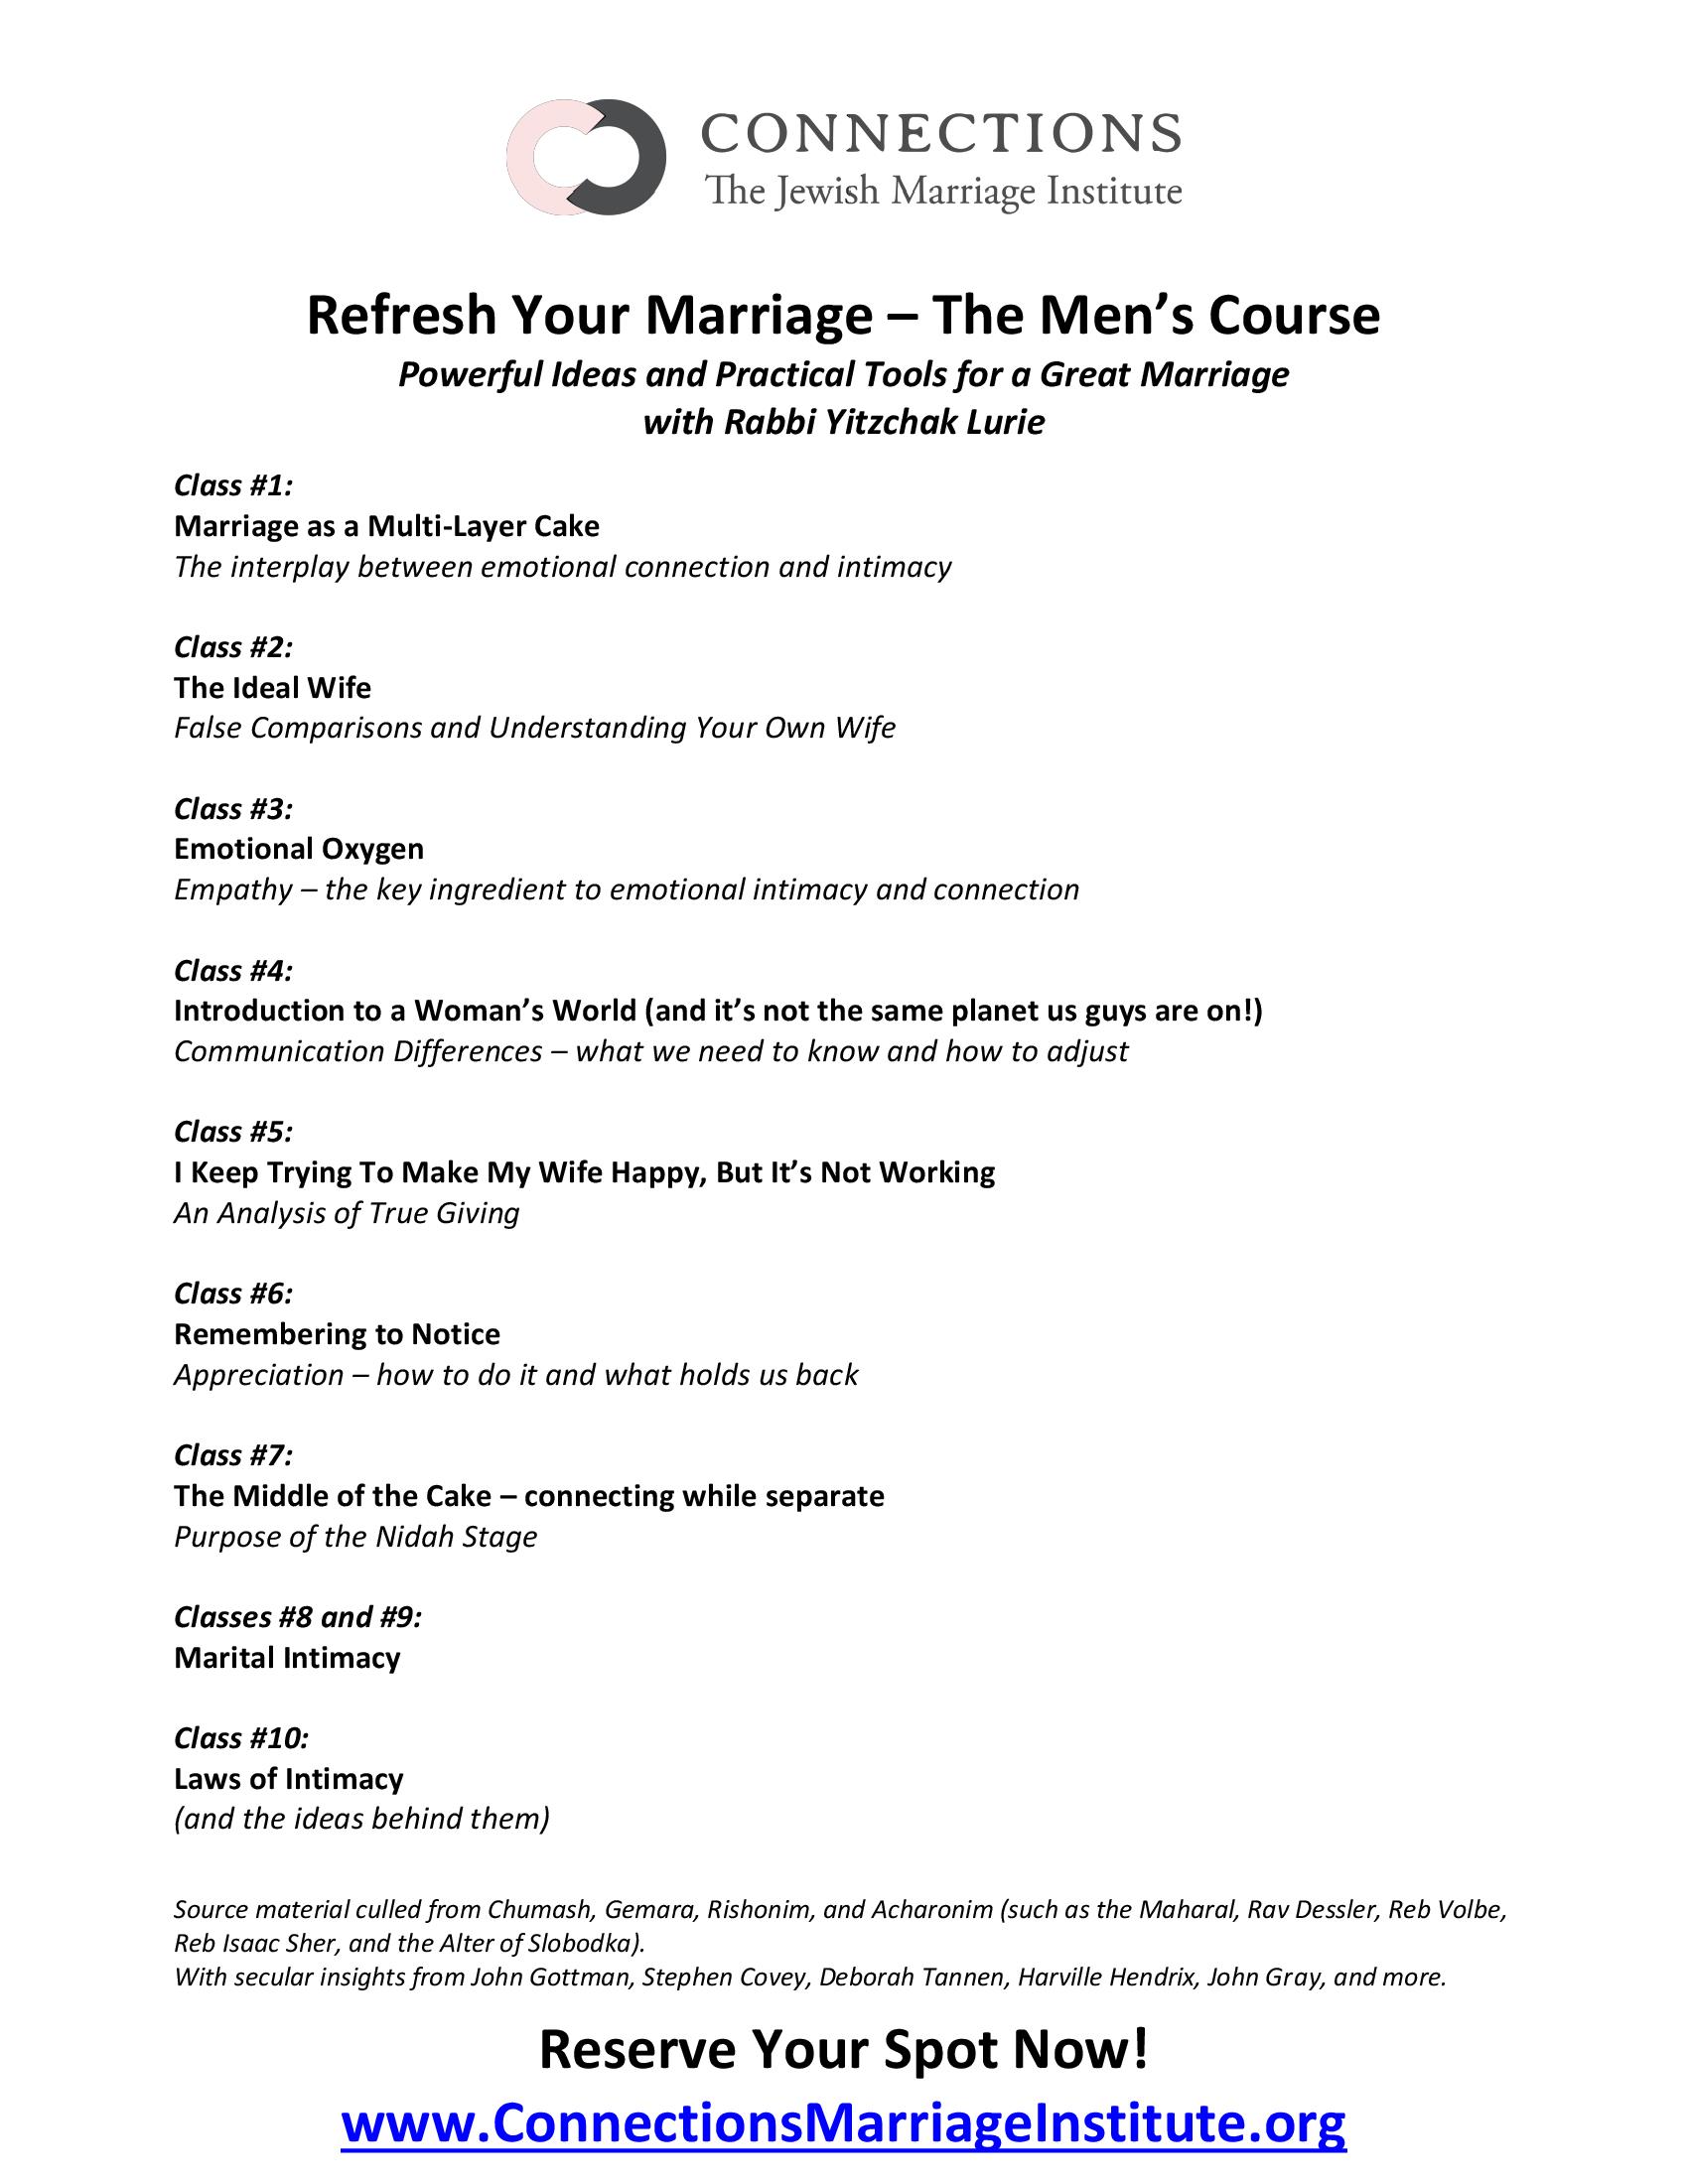 Click here for men's course outline!